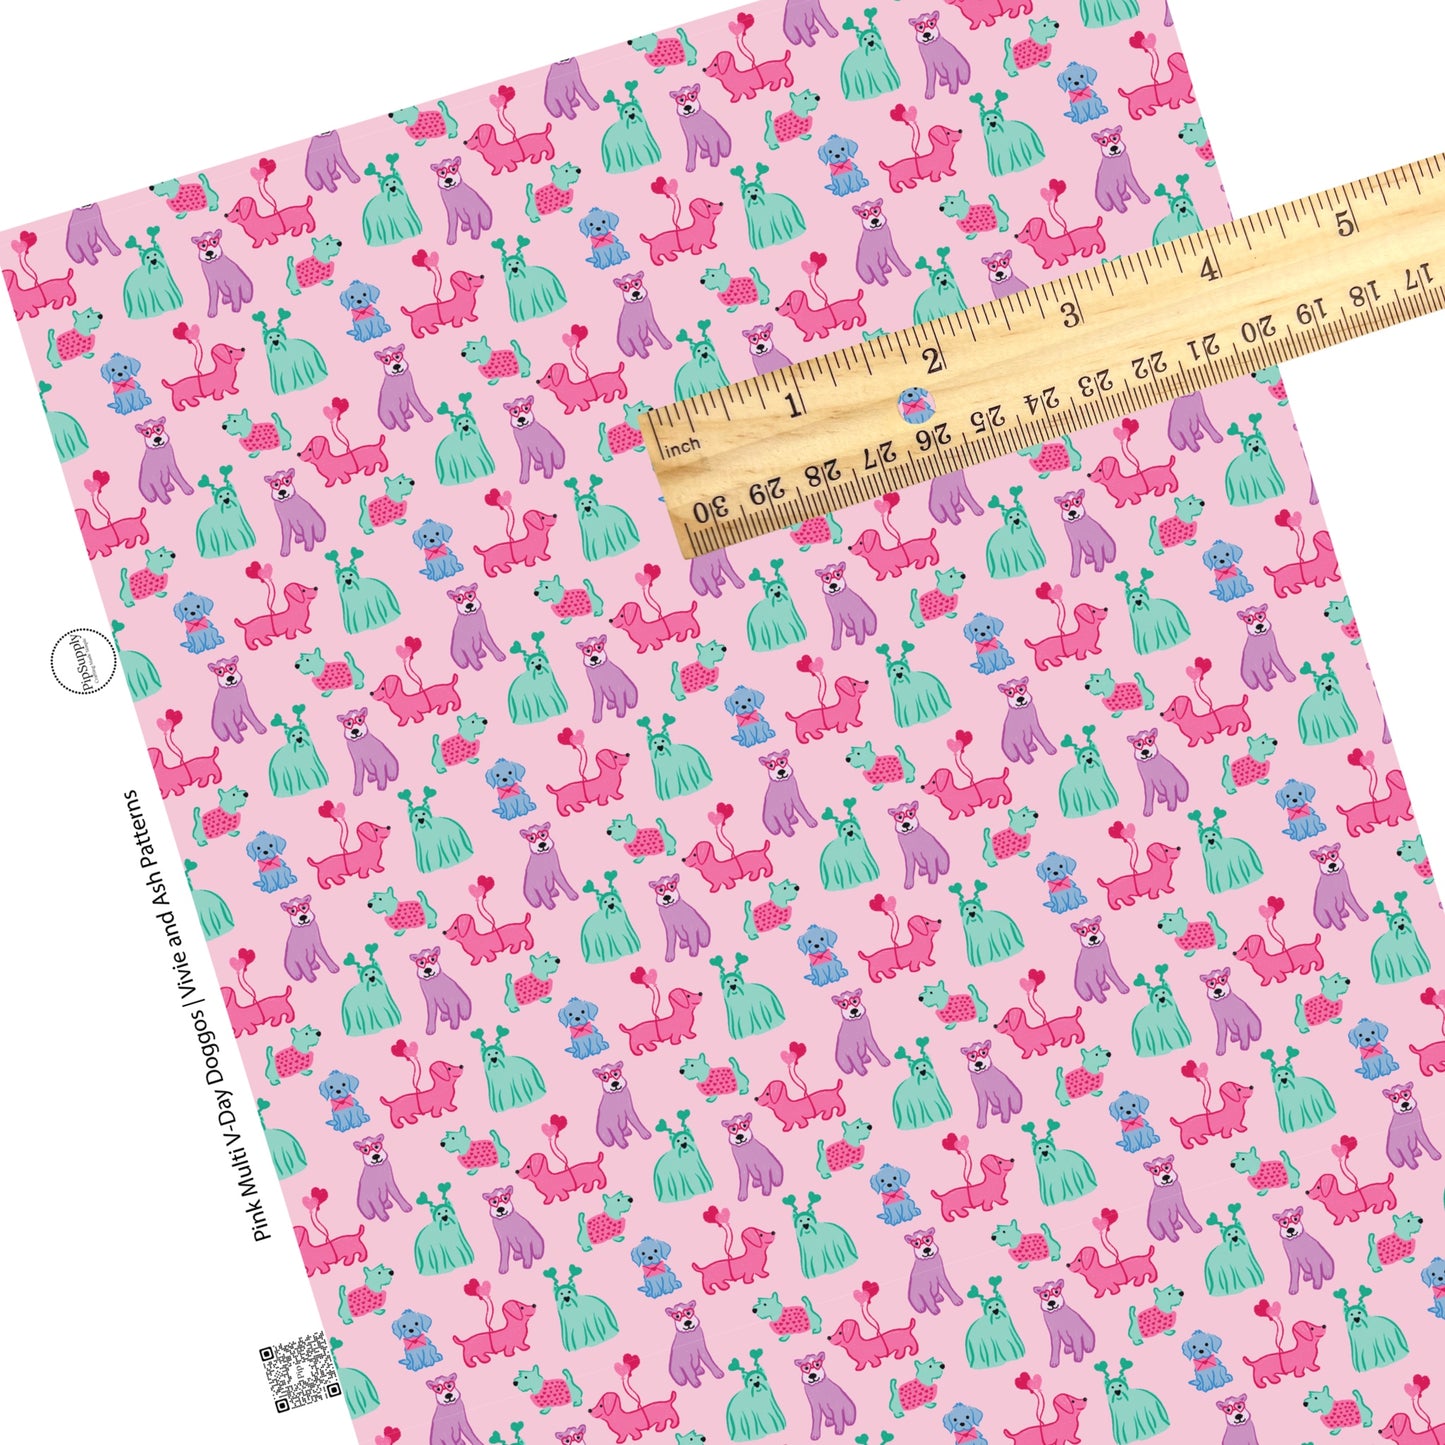 These Valentine's Day pattern faux leather sheets contain the following design elements: pastel colored dogs on pink. Our CPSIA compliant faux leather sheets or rolls can be used for all types of crafting projects.